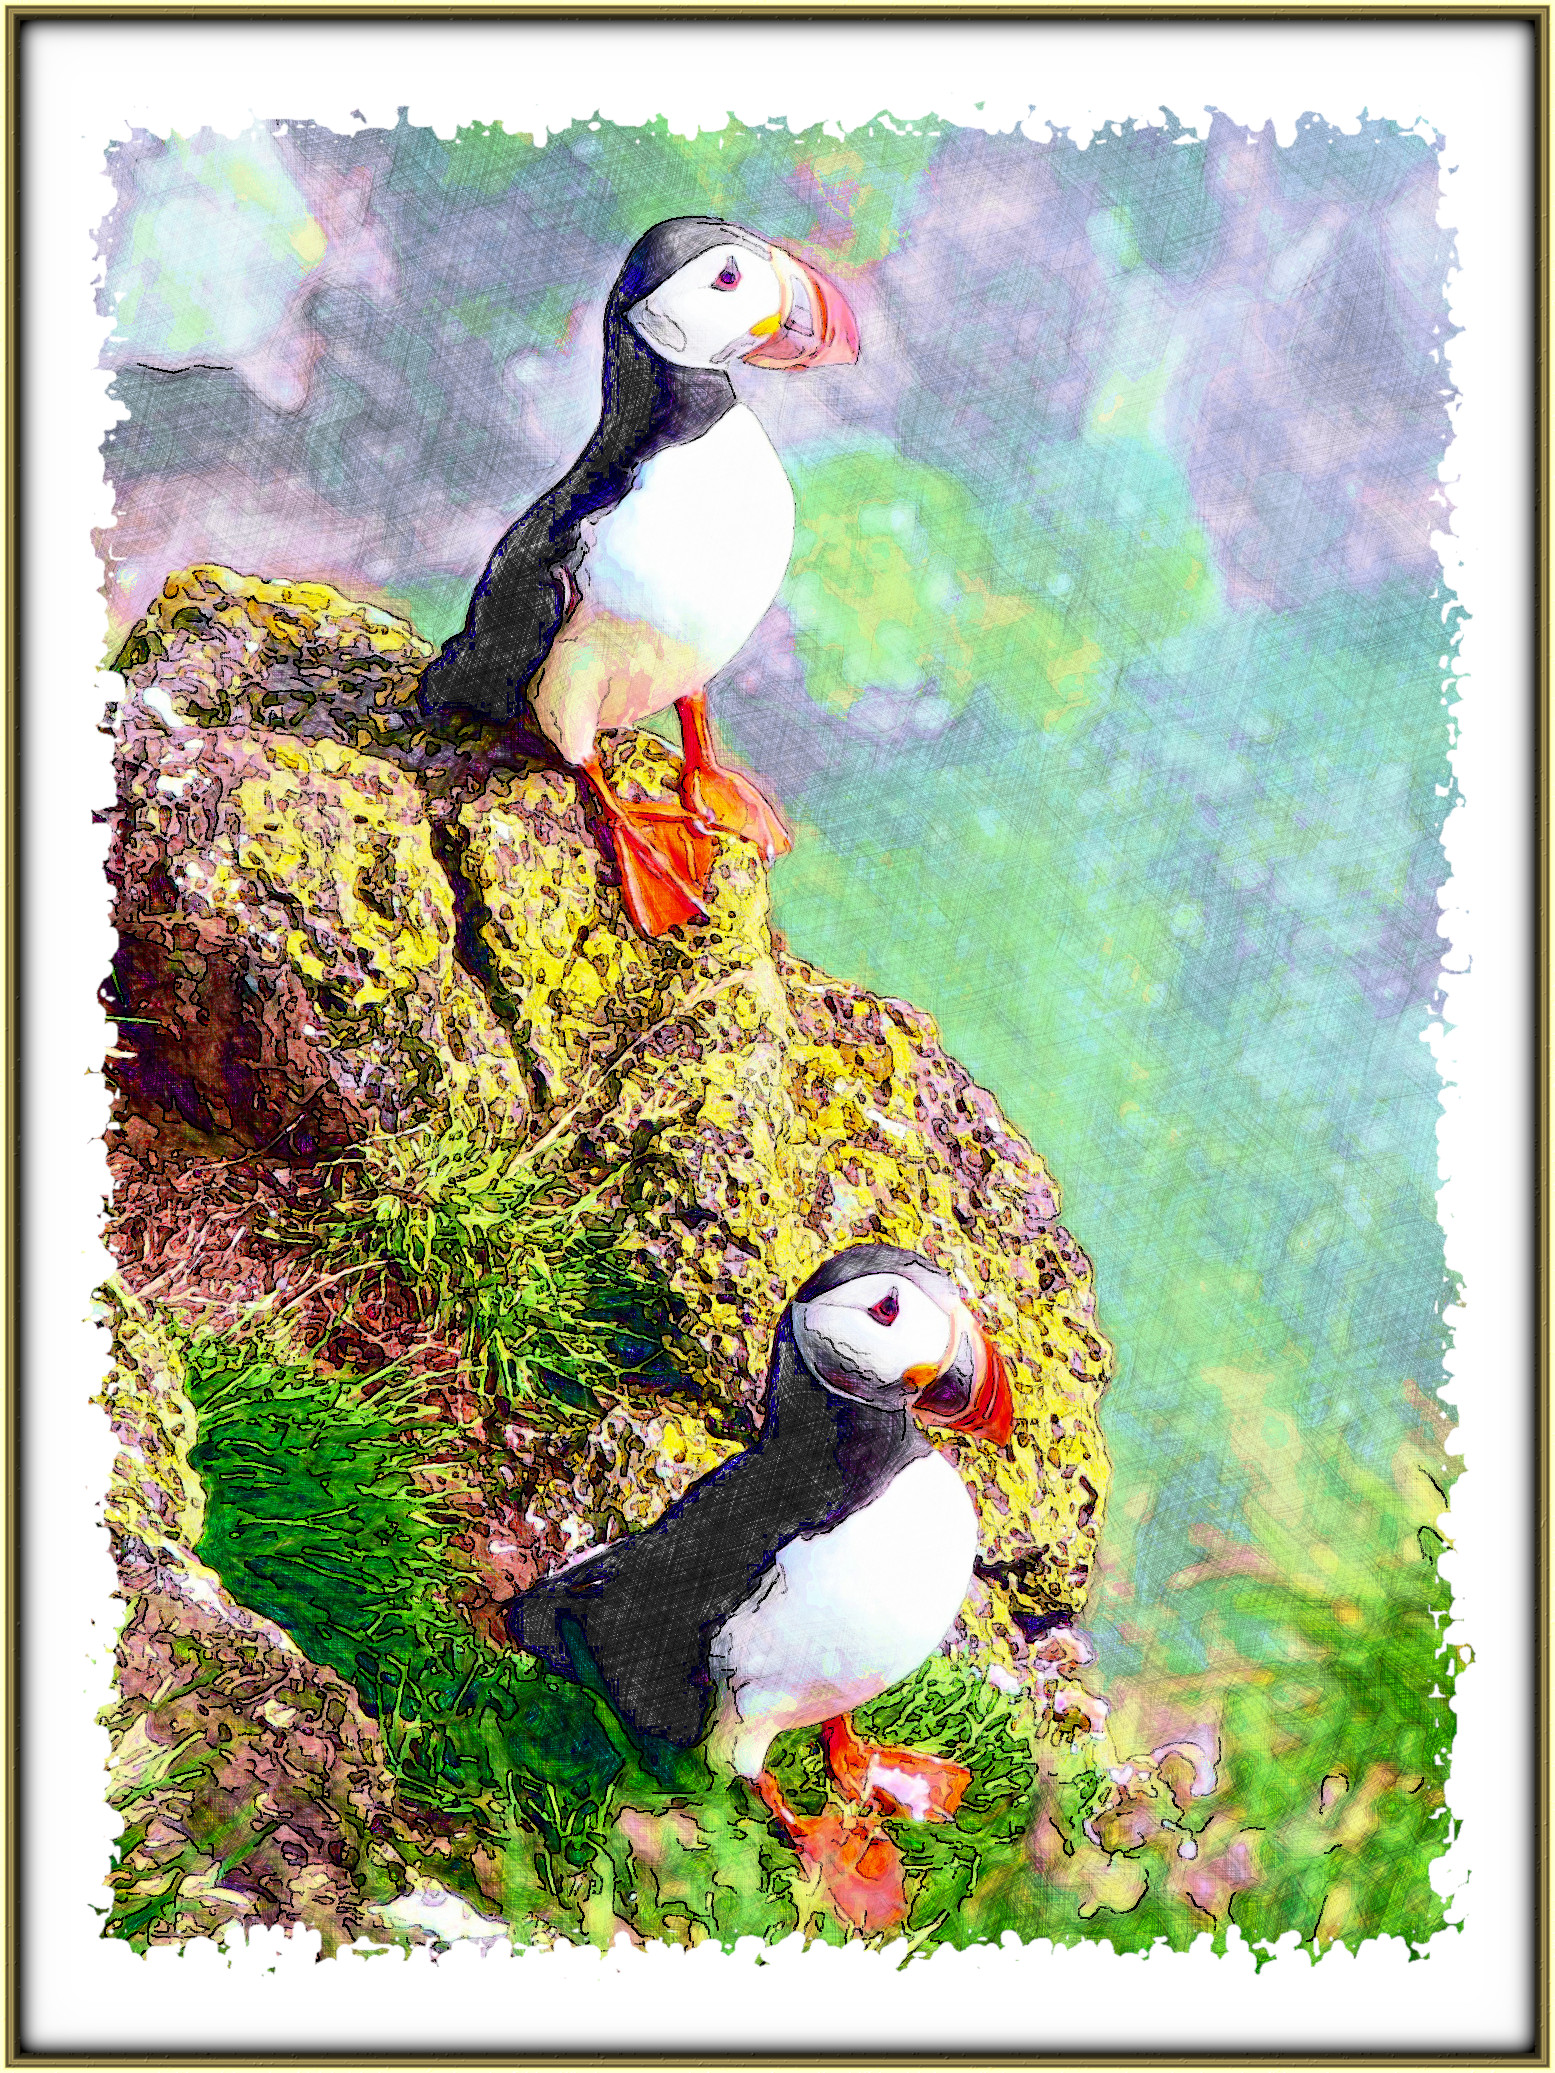 2024-01-09 08-57-44 puffin-6647068_1920 with a Drawing Effect (True,16,8,4,1).jpg